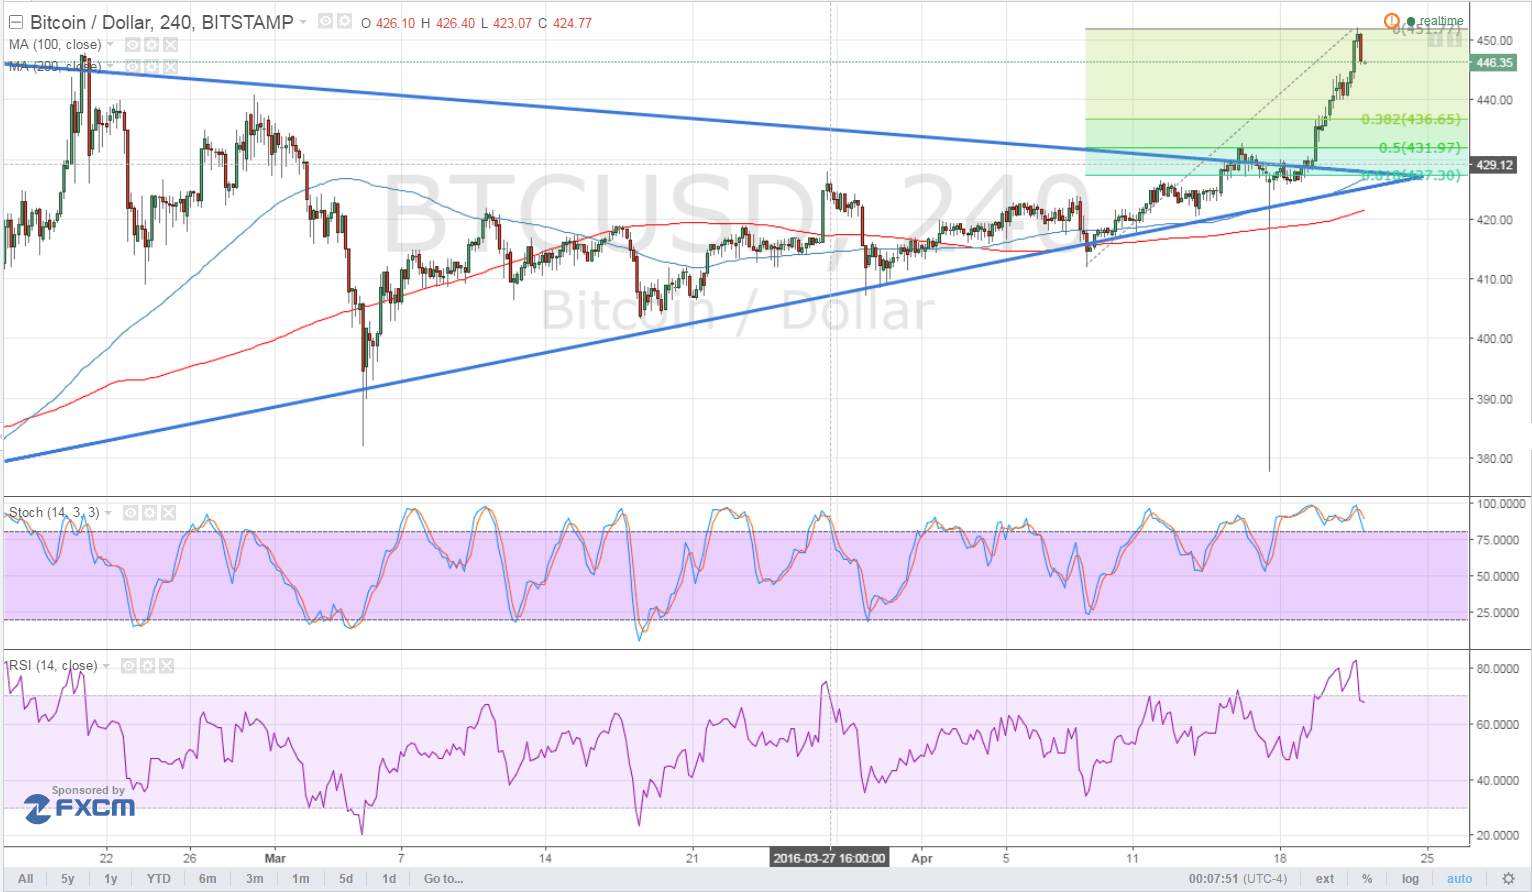 Bitcoin Price Technical Analysis for 04/22/2016 - Upside Breakout Pullback?